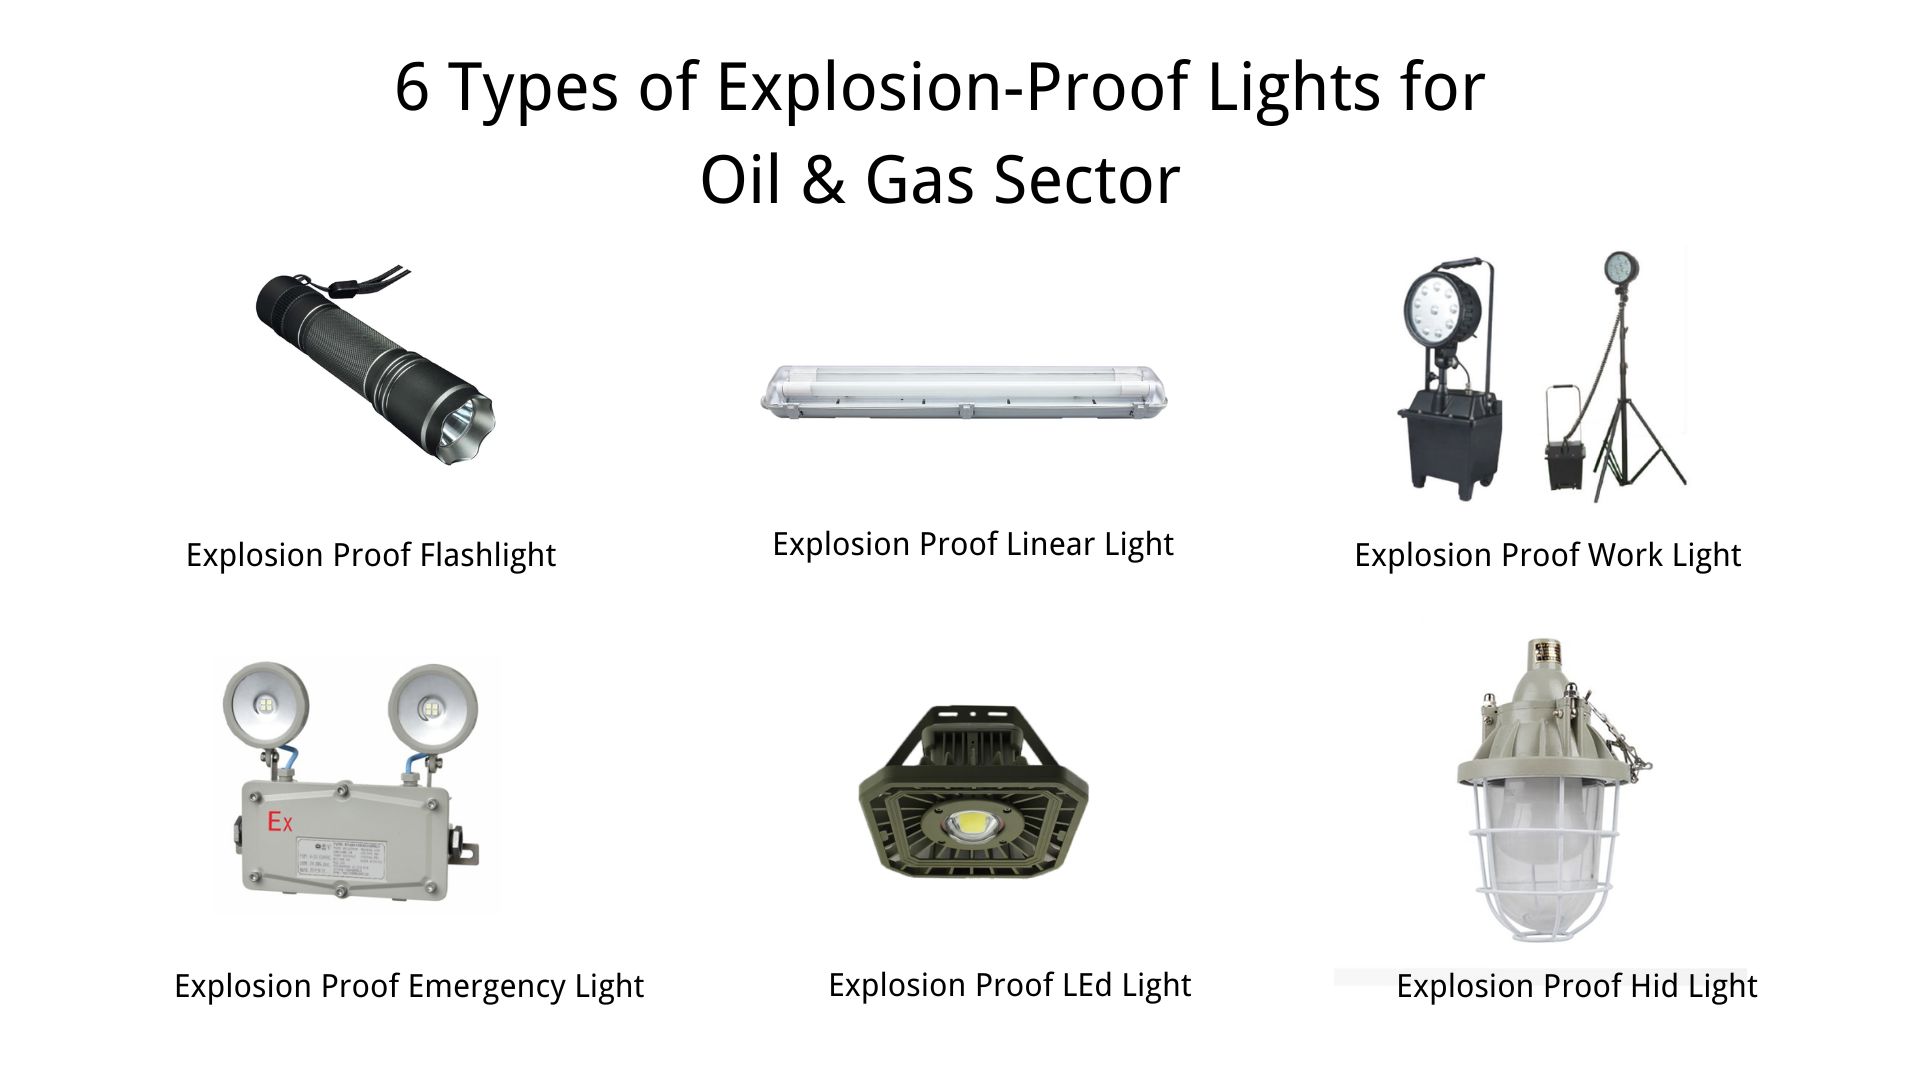 6 types of explosion-proof lights